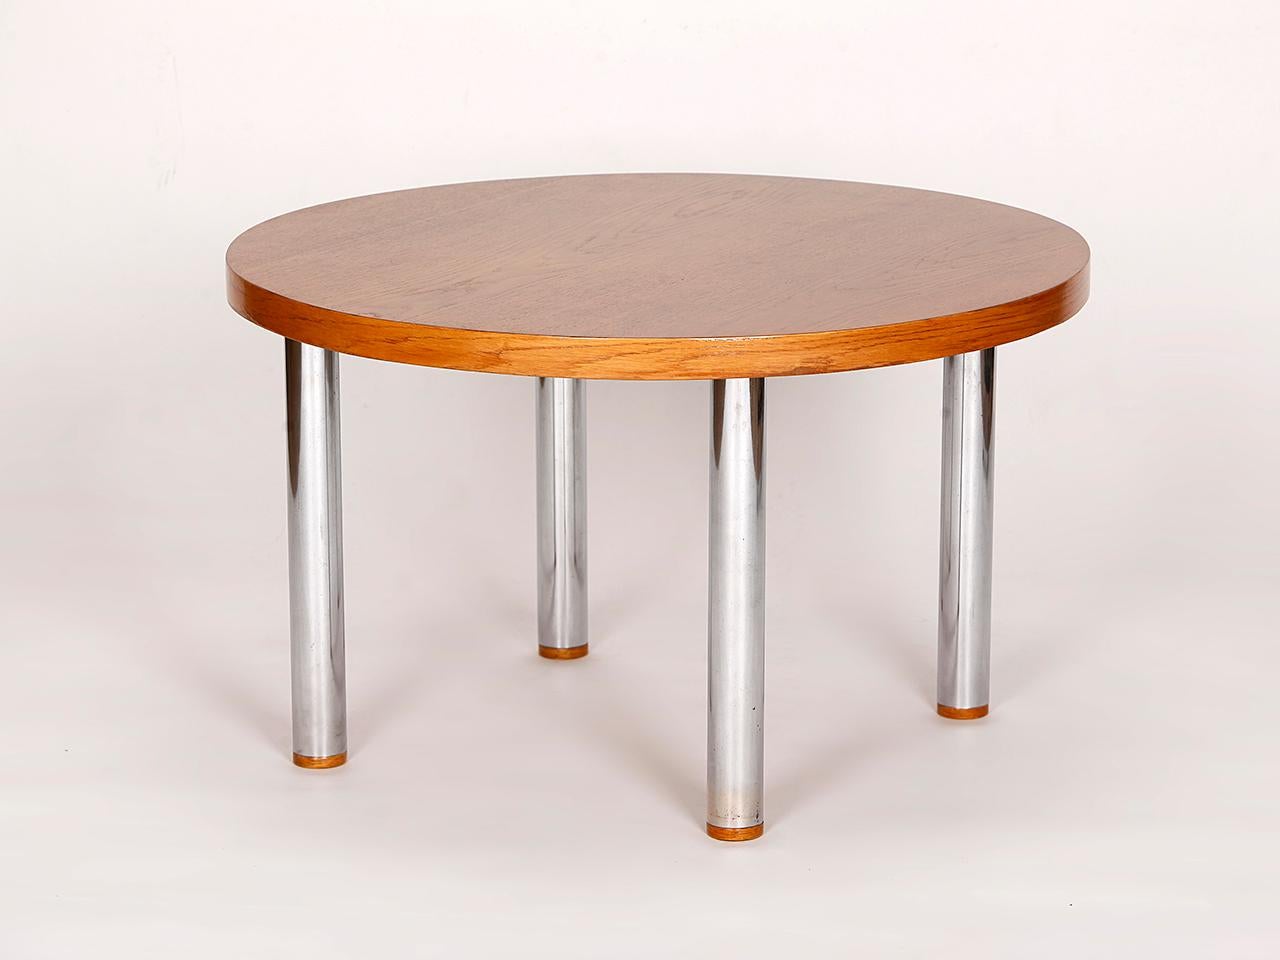 This table features a restored, oak veneered wooden top and a chromed tubular steel construction with patina. We offer shop to door delivery worldwide in special transport boxes.
 